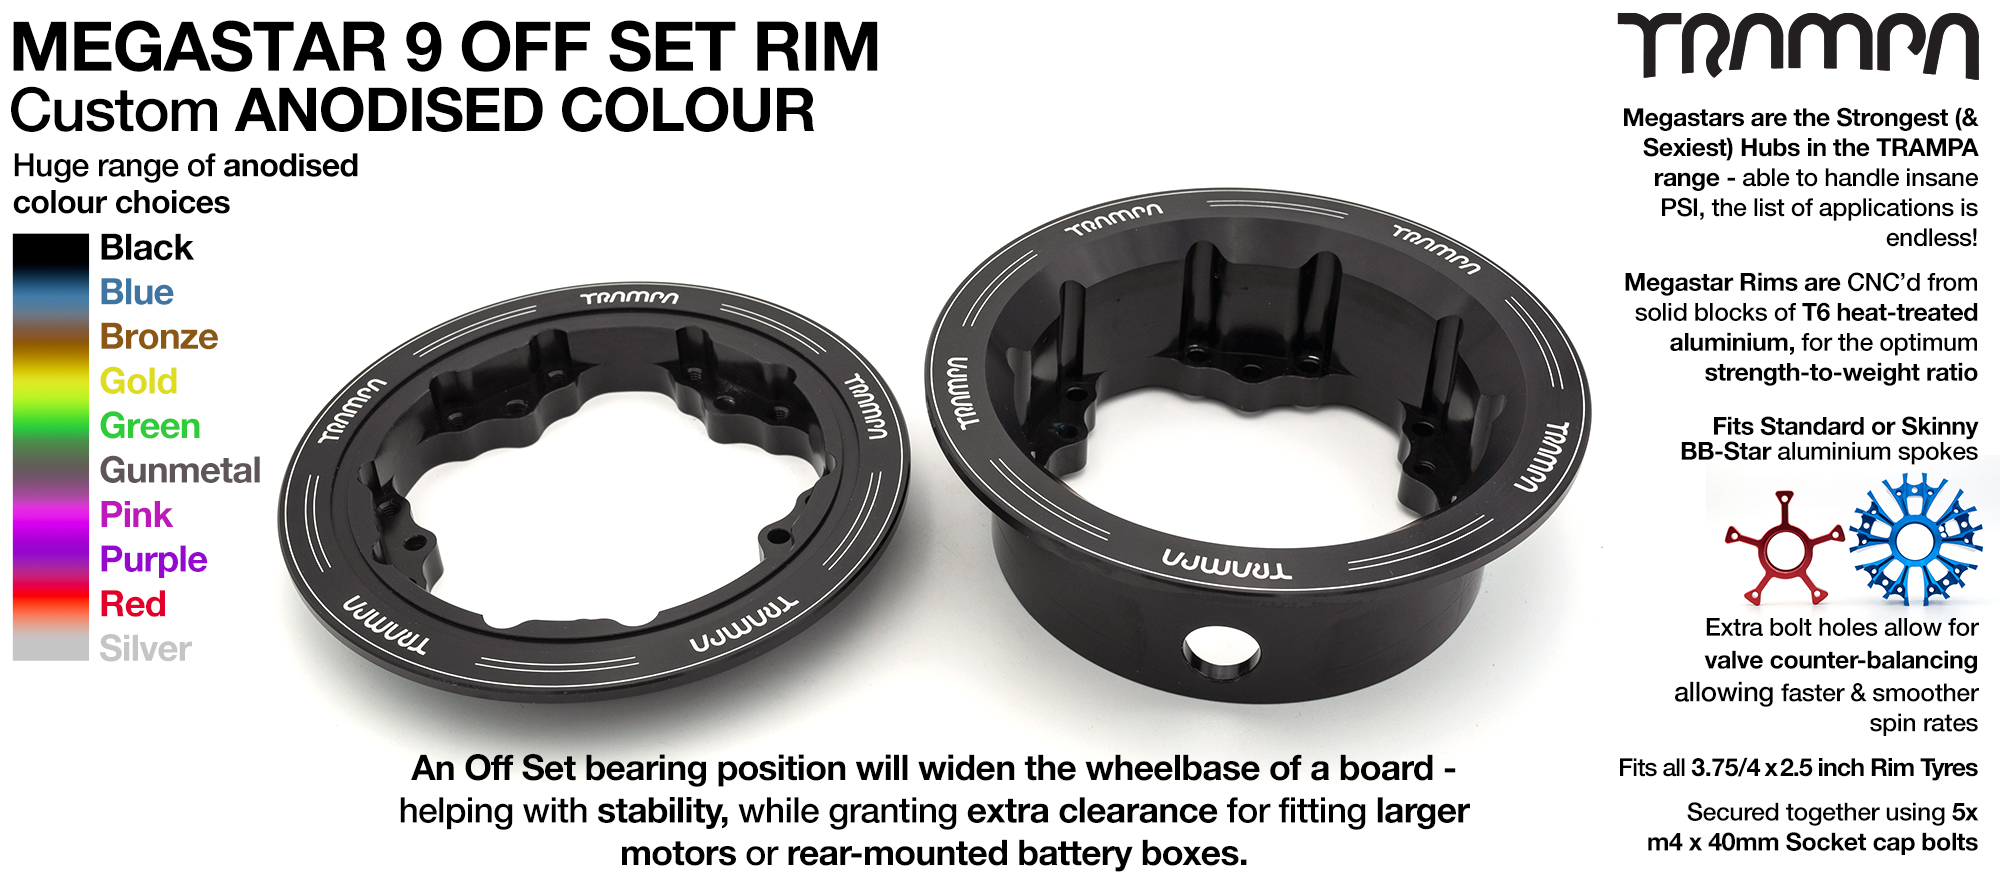 MEGASTAR 9 Rims Measure 3.75/4x 2.5 Inch & the bearings are positioned OFF-SET & accept 3.75 & 4 Inch Rim Tyres